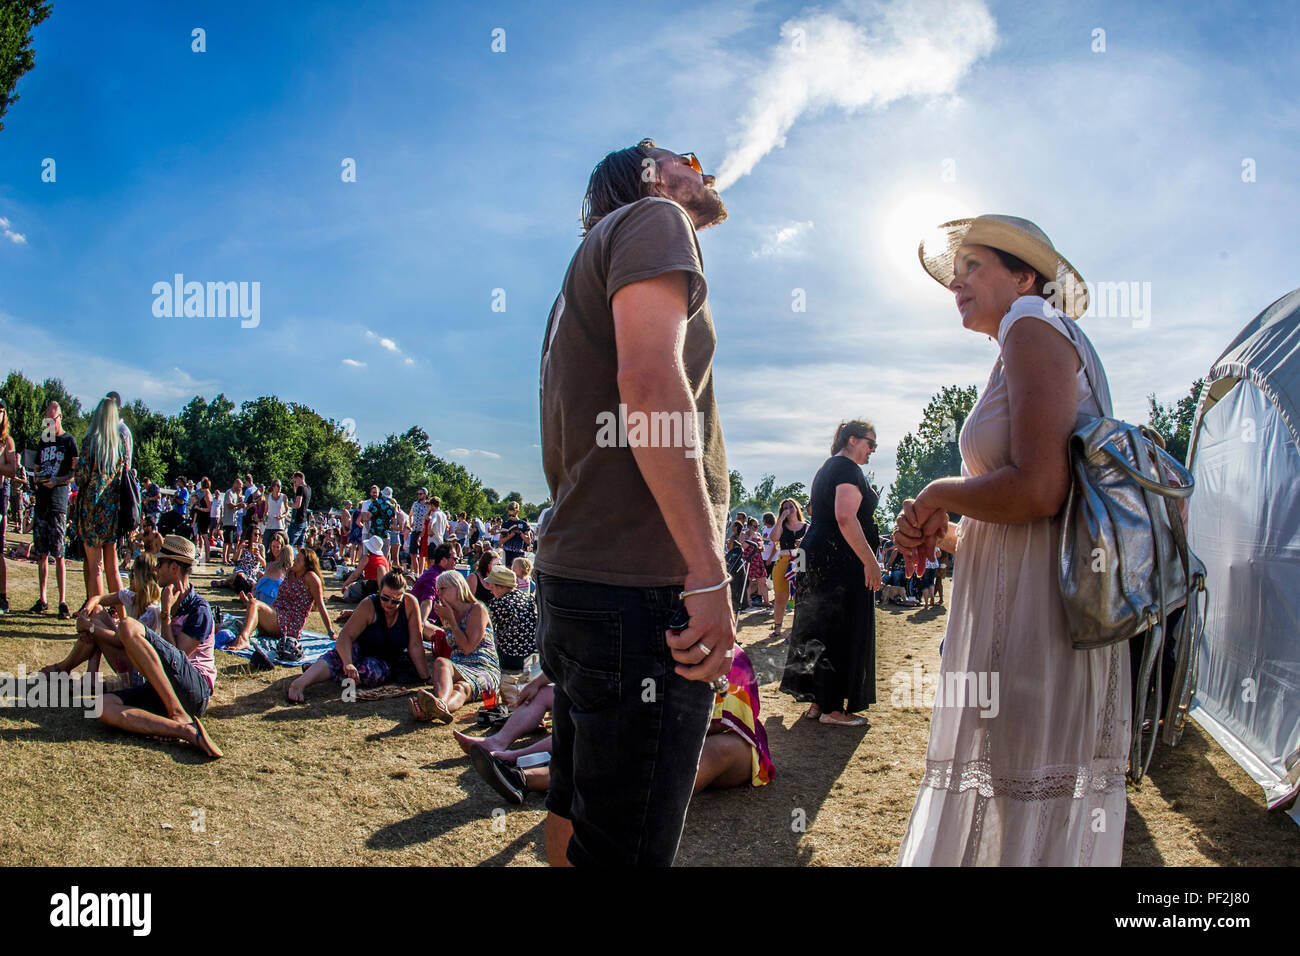 A man vaping talks to a lady in a wide brimmed hat at an open air music festival on a hot day in London Stock Photo